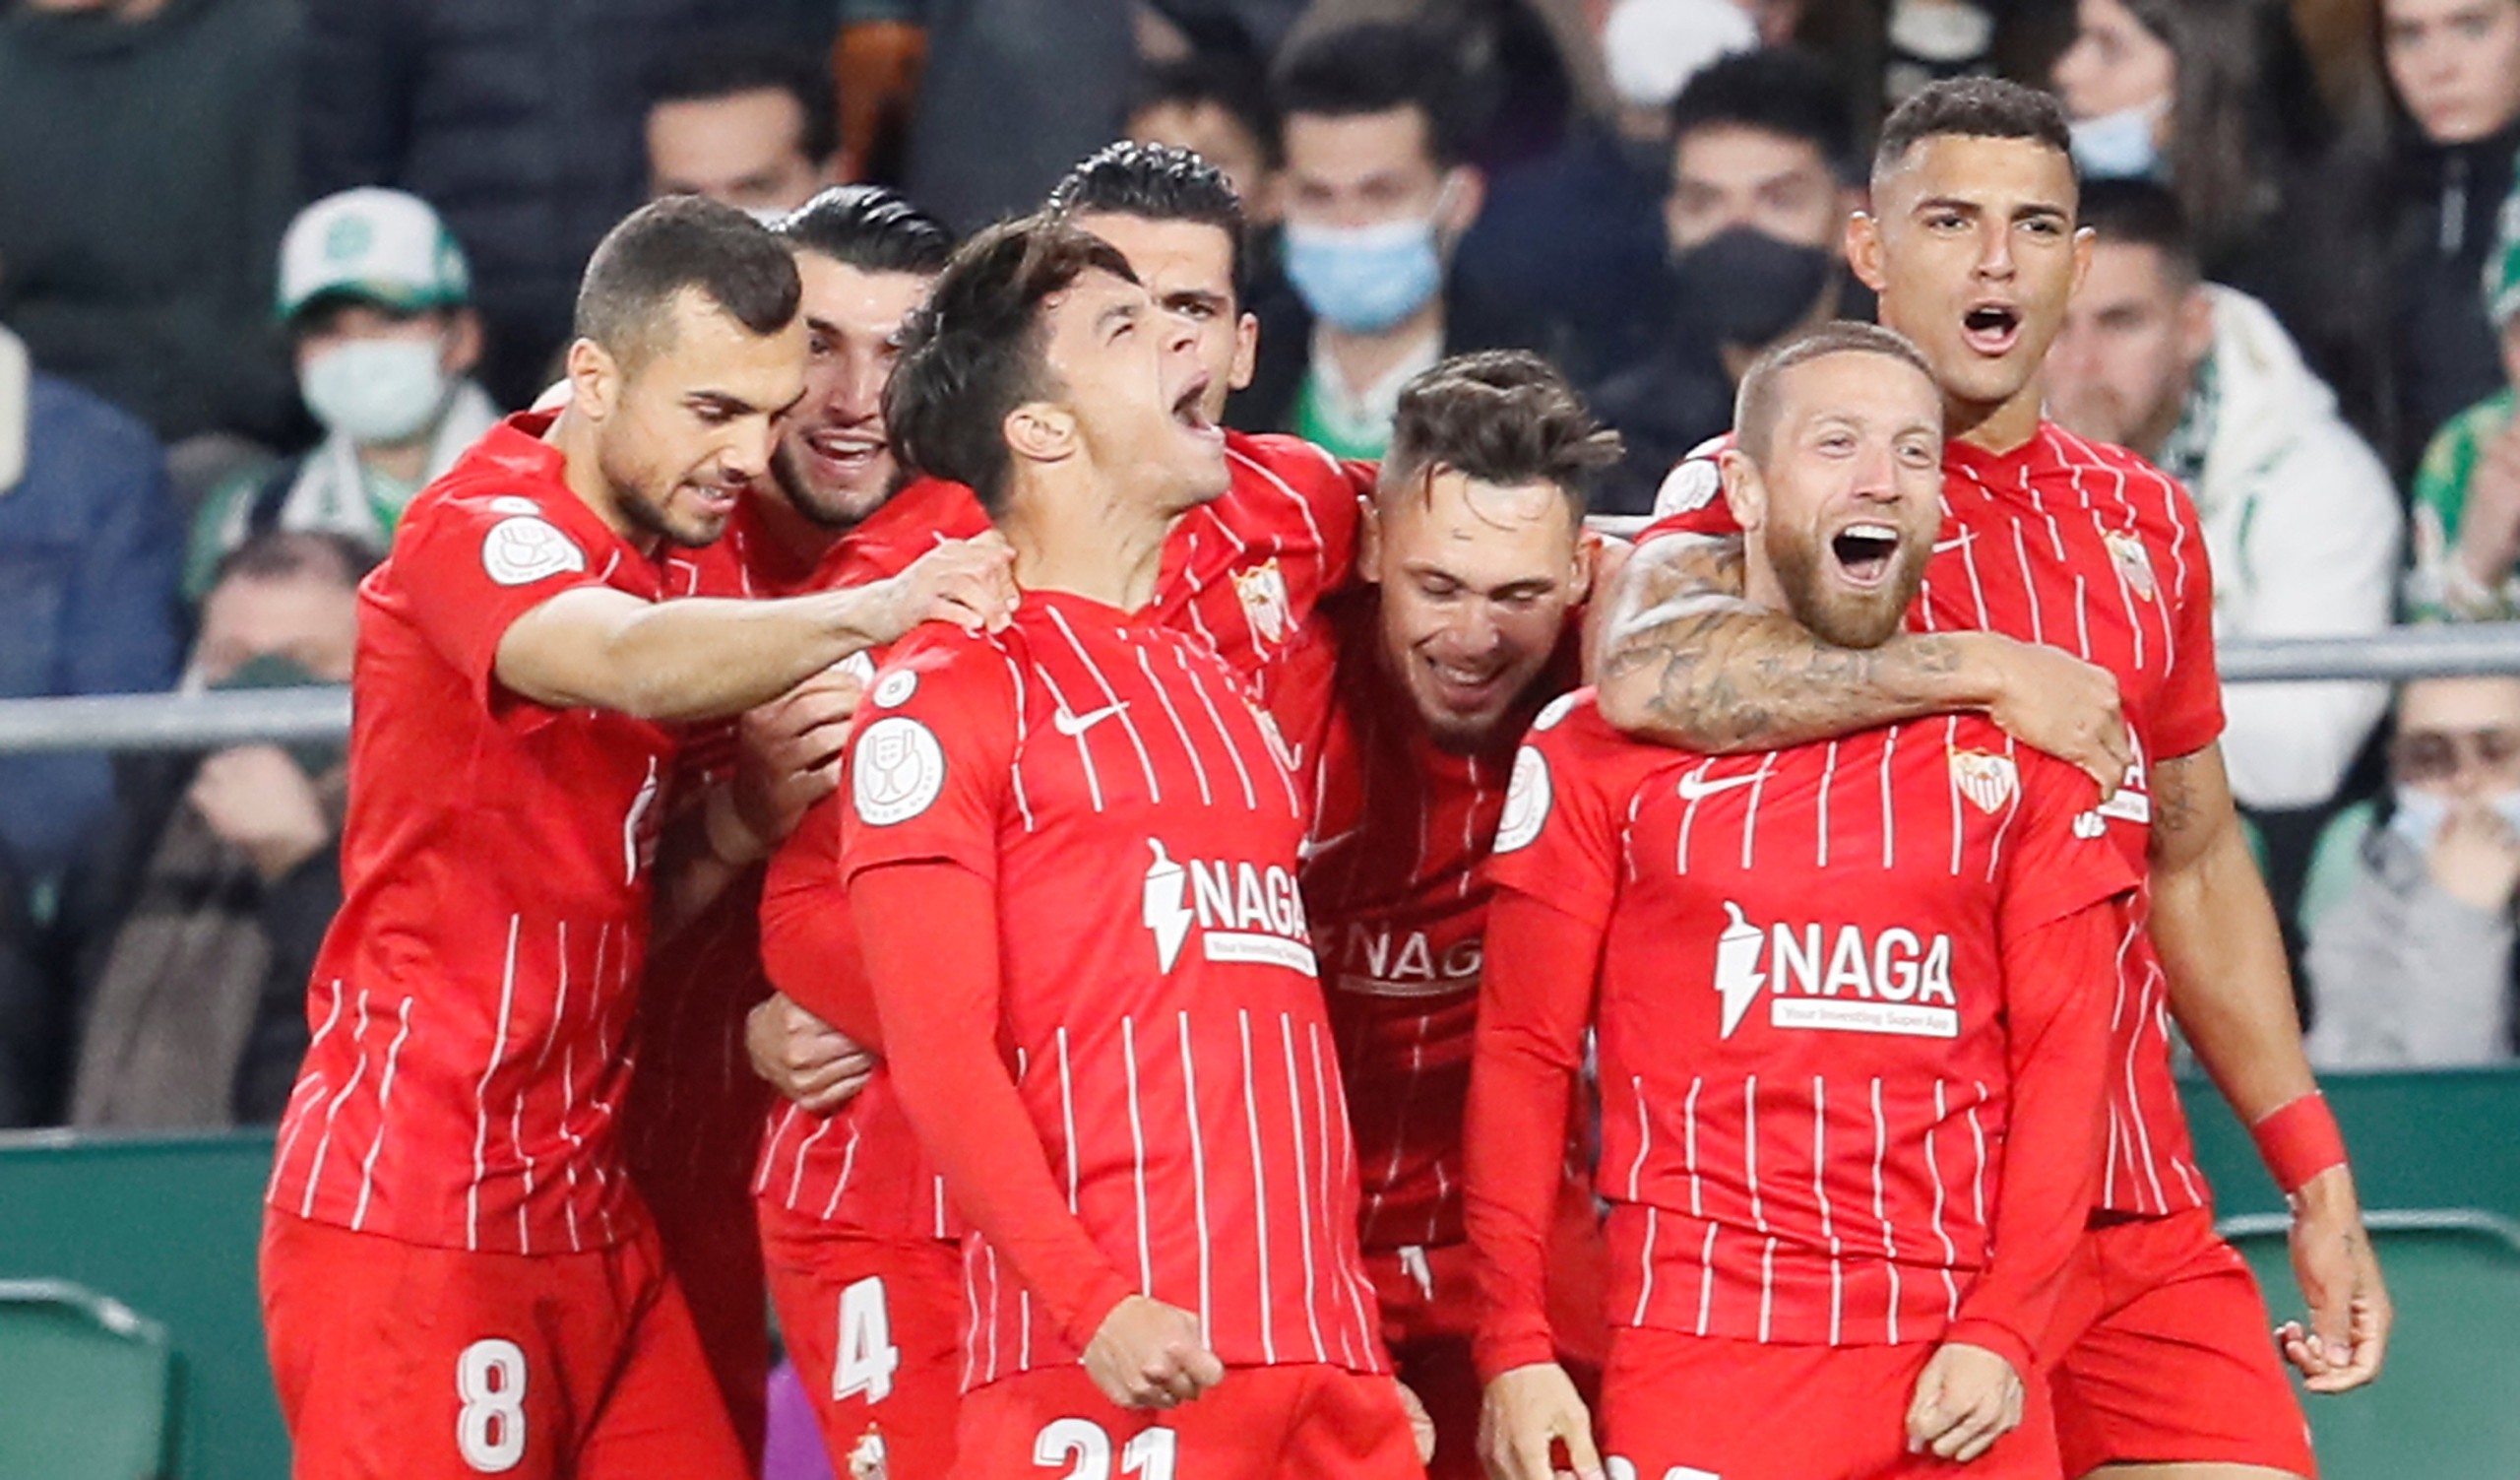 epa09688427 Sevilla's Alejandro 'Papu' Gomez (2-R) celebrates with teammates after scoring the 1-0 lead during the Spanish King's Cup round of 16 derby soccer match between Real Betis and Sevilla FC in Seville, Spain, 15 January 2022.  EPA/Jose Manuel Vidal